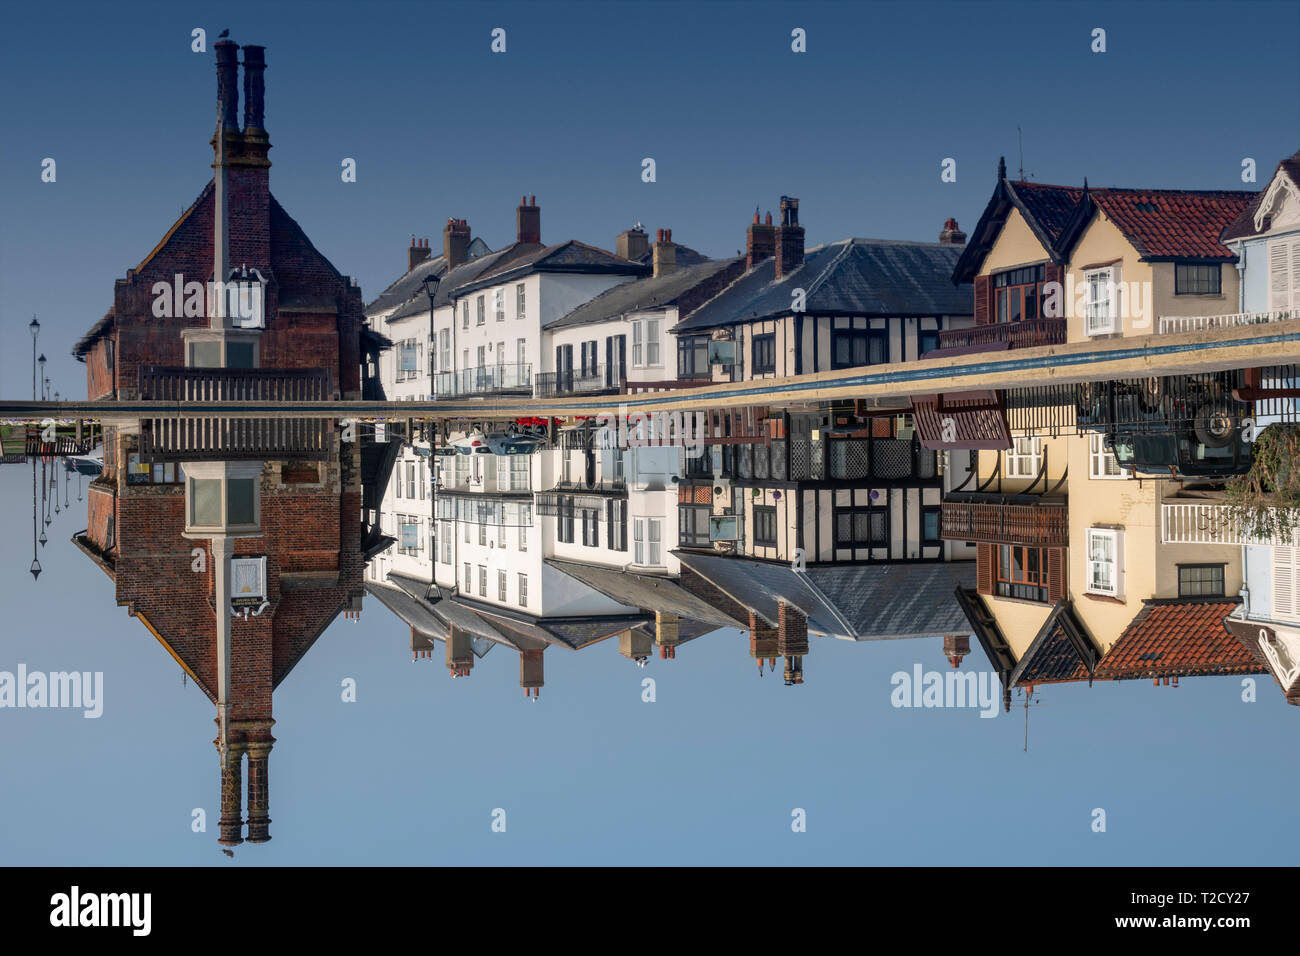 Boating pond with Moot Hall in background, Aldeburgh Suffolk Stock Photo